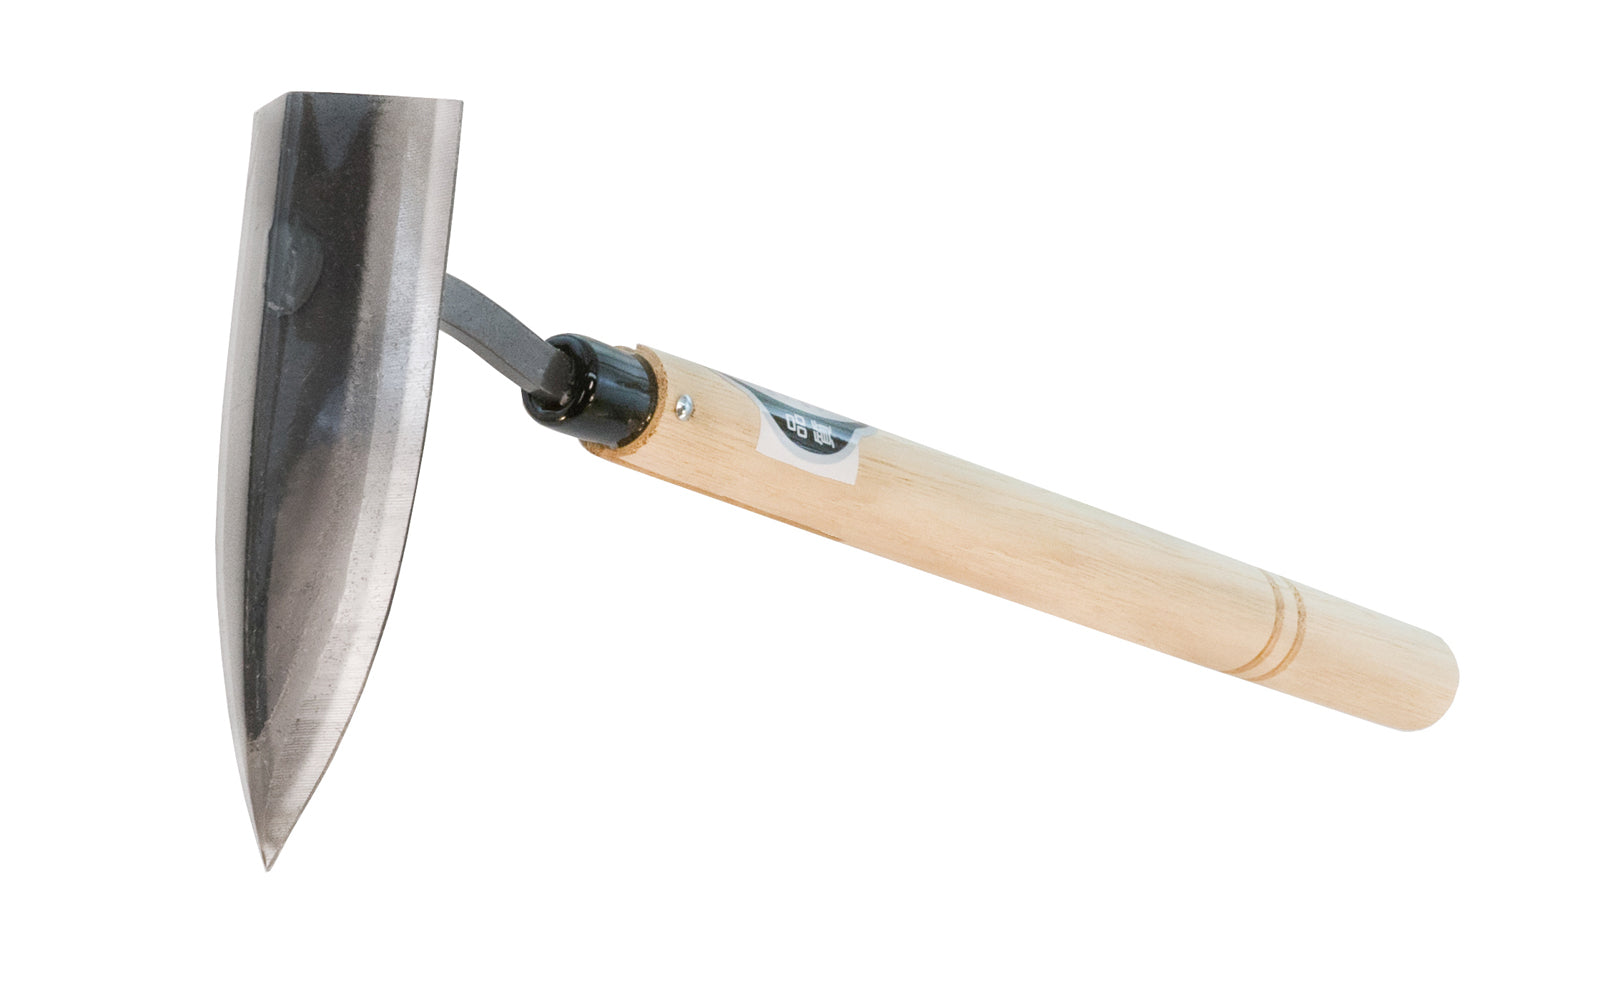 Japanese Asano Double-Edge Sickle Weeder that's good for weeding corners. Made of high carbon steel, the blade of this weeder is very sharp & cuts tough weeds & roots with ease. V-shape weeder is also good for making rows of dirt. Great for planting bulbs, onions, garlic, etc. 4524173009012. Asano brand. Made in Japan.